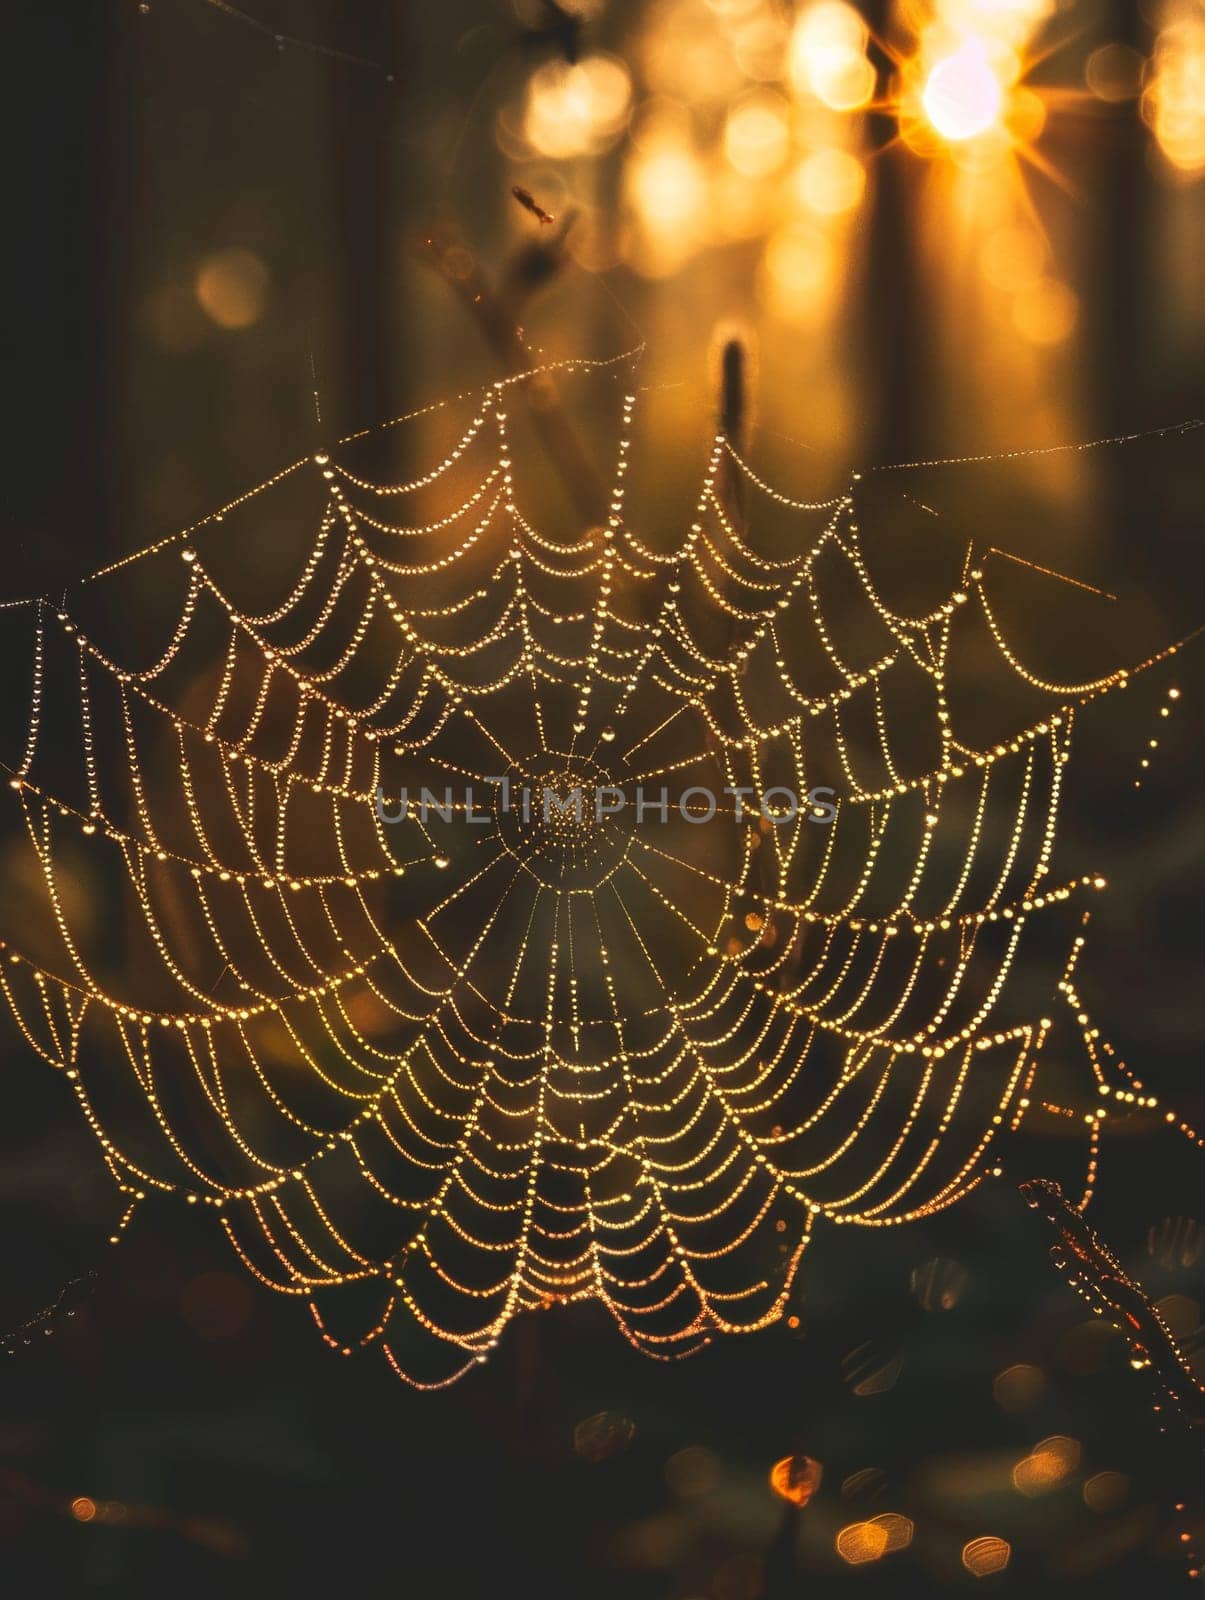 Morning dew clings to the delicate strands of a spiderweb, illuminated by a golden sunrise that infuses the scene with warmth.